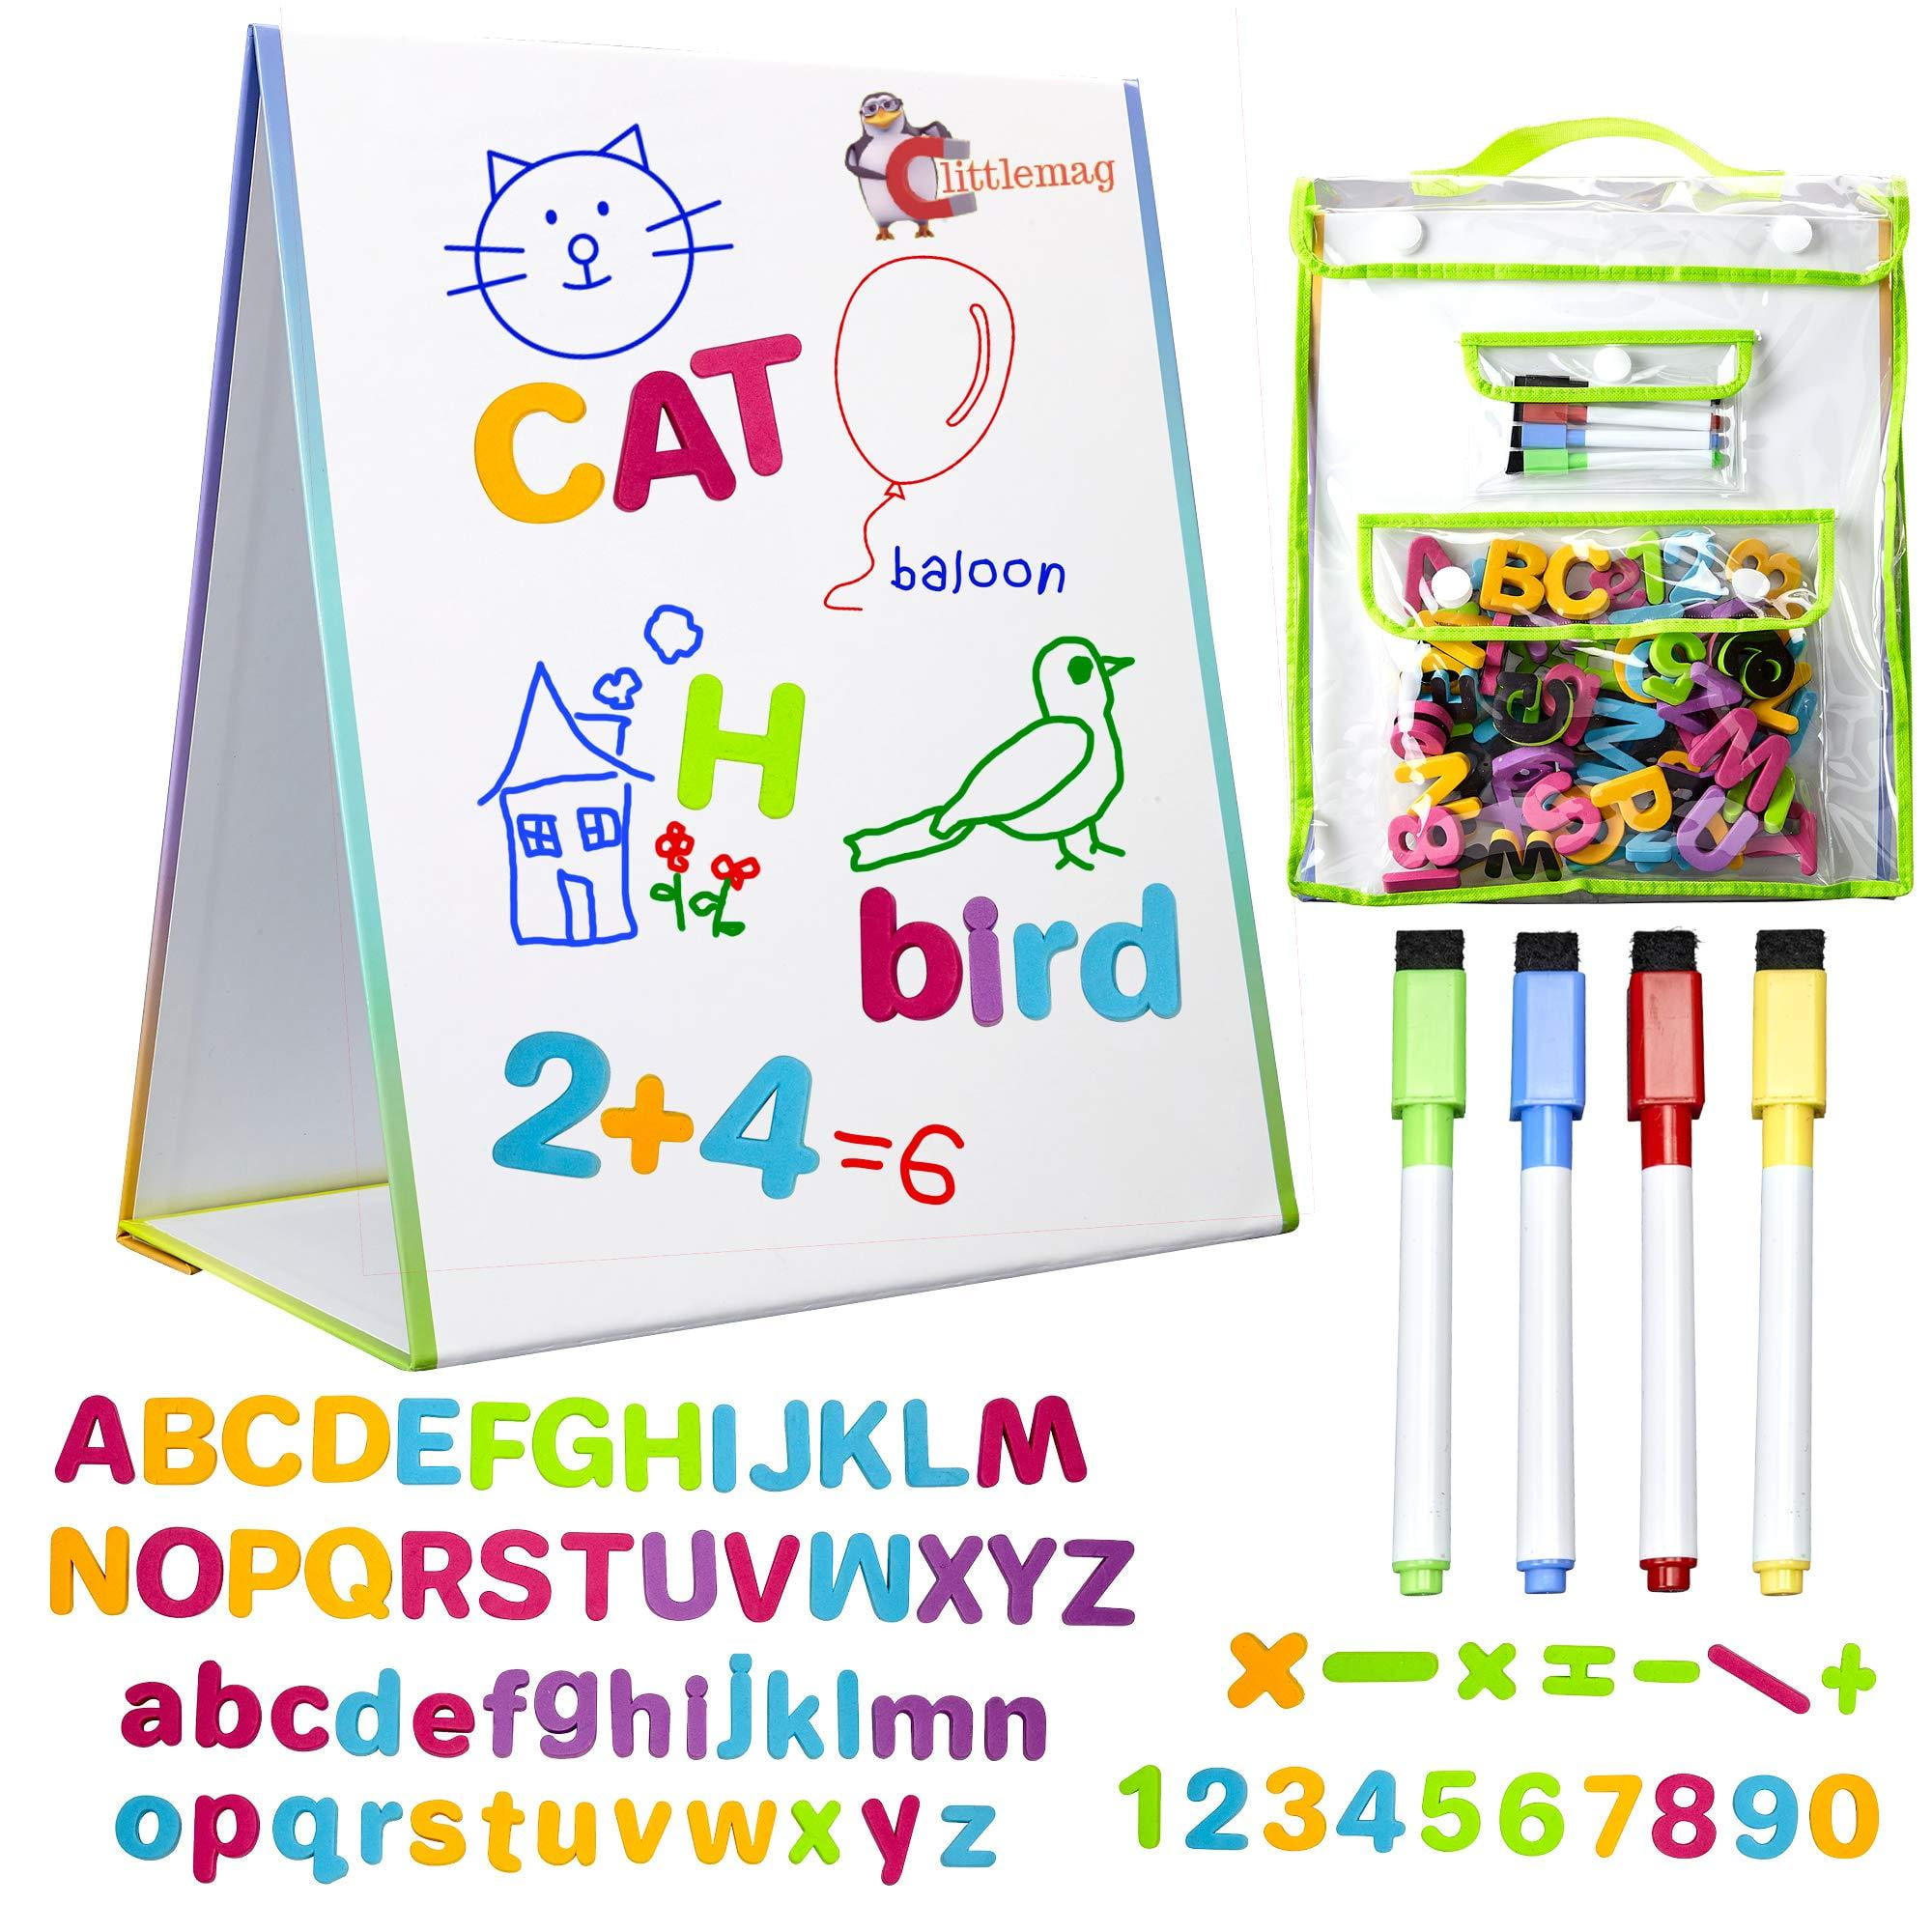 2 Sided Whiteboard 71 Piece Small Magnetic Dry Erase Easel for Kids Education Magnetic Foam Letters and Numbers Classroom by ABACO BRANDS 4 Dry Erase Markers w Magnetic Cap Erasers Toys 